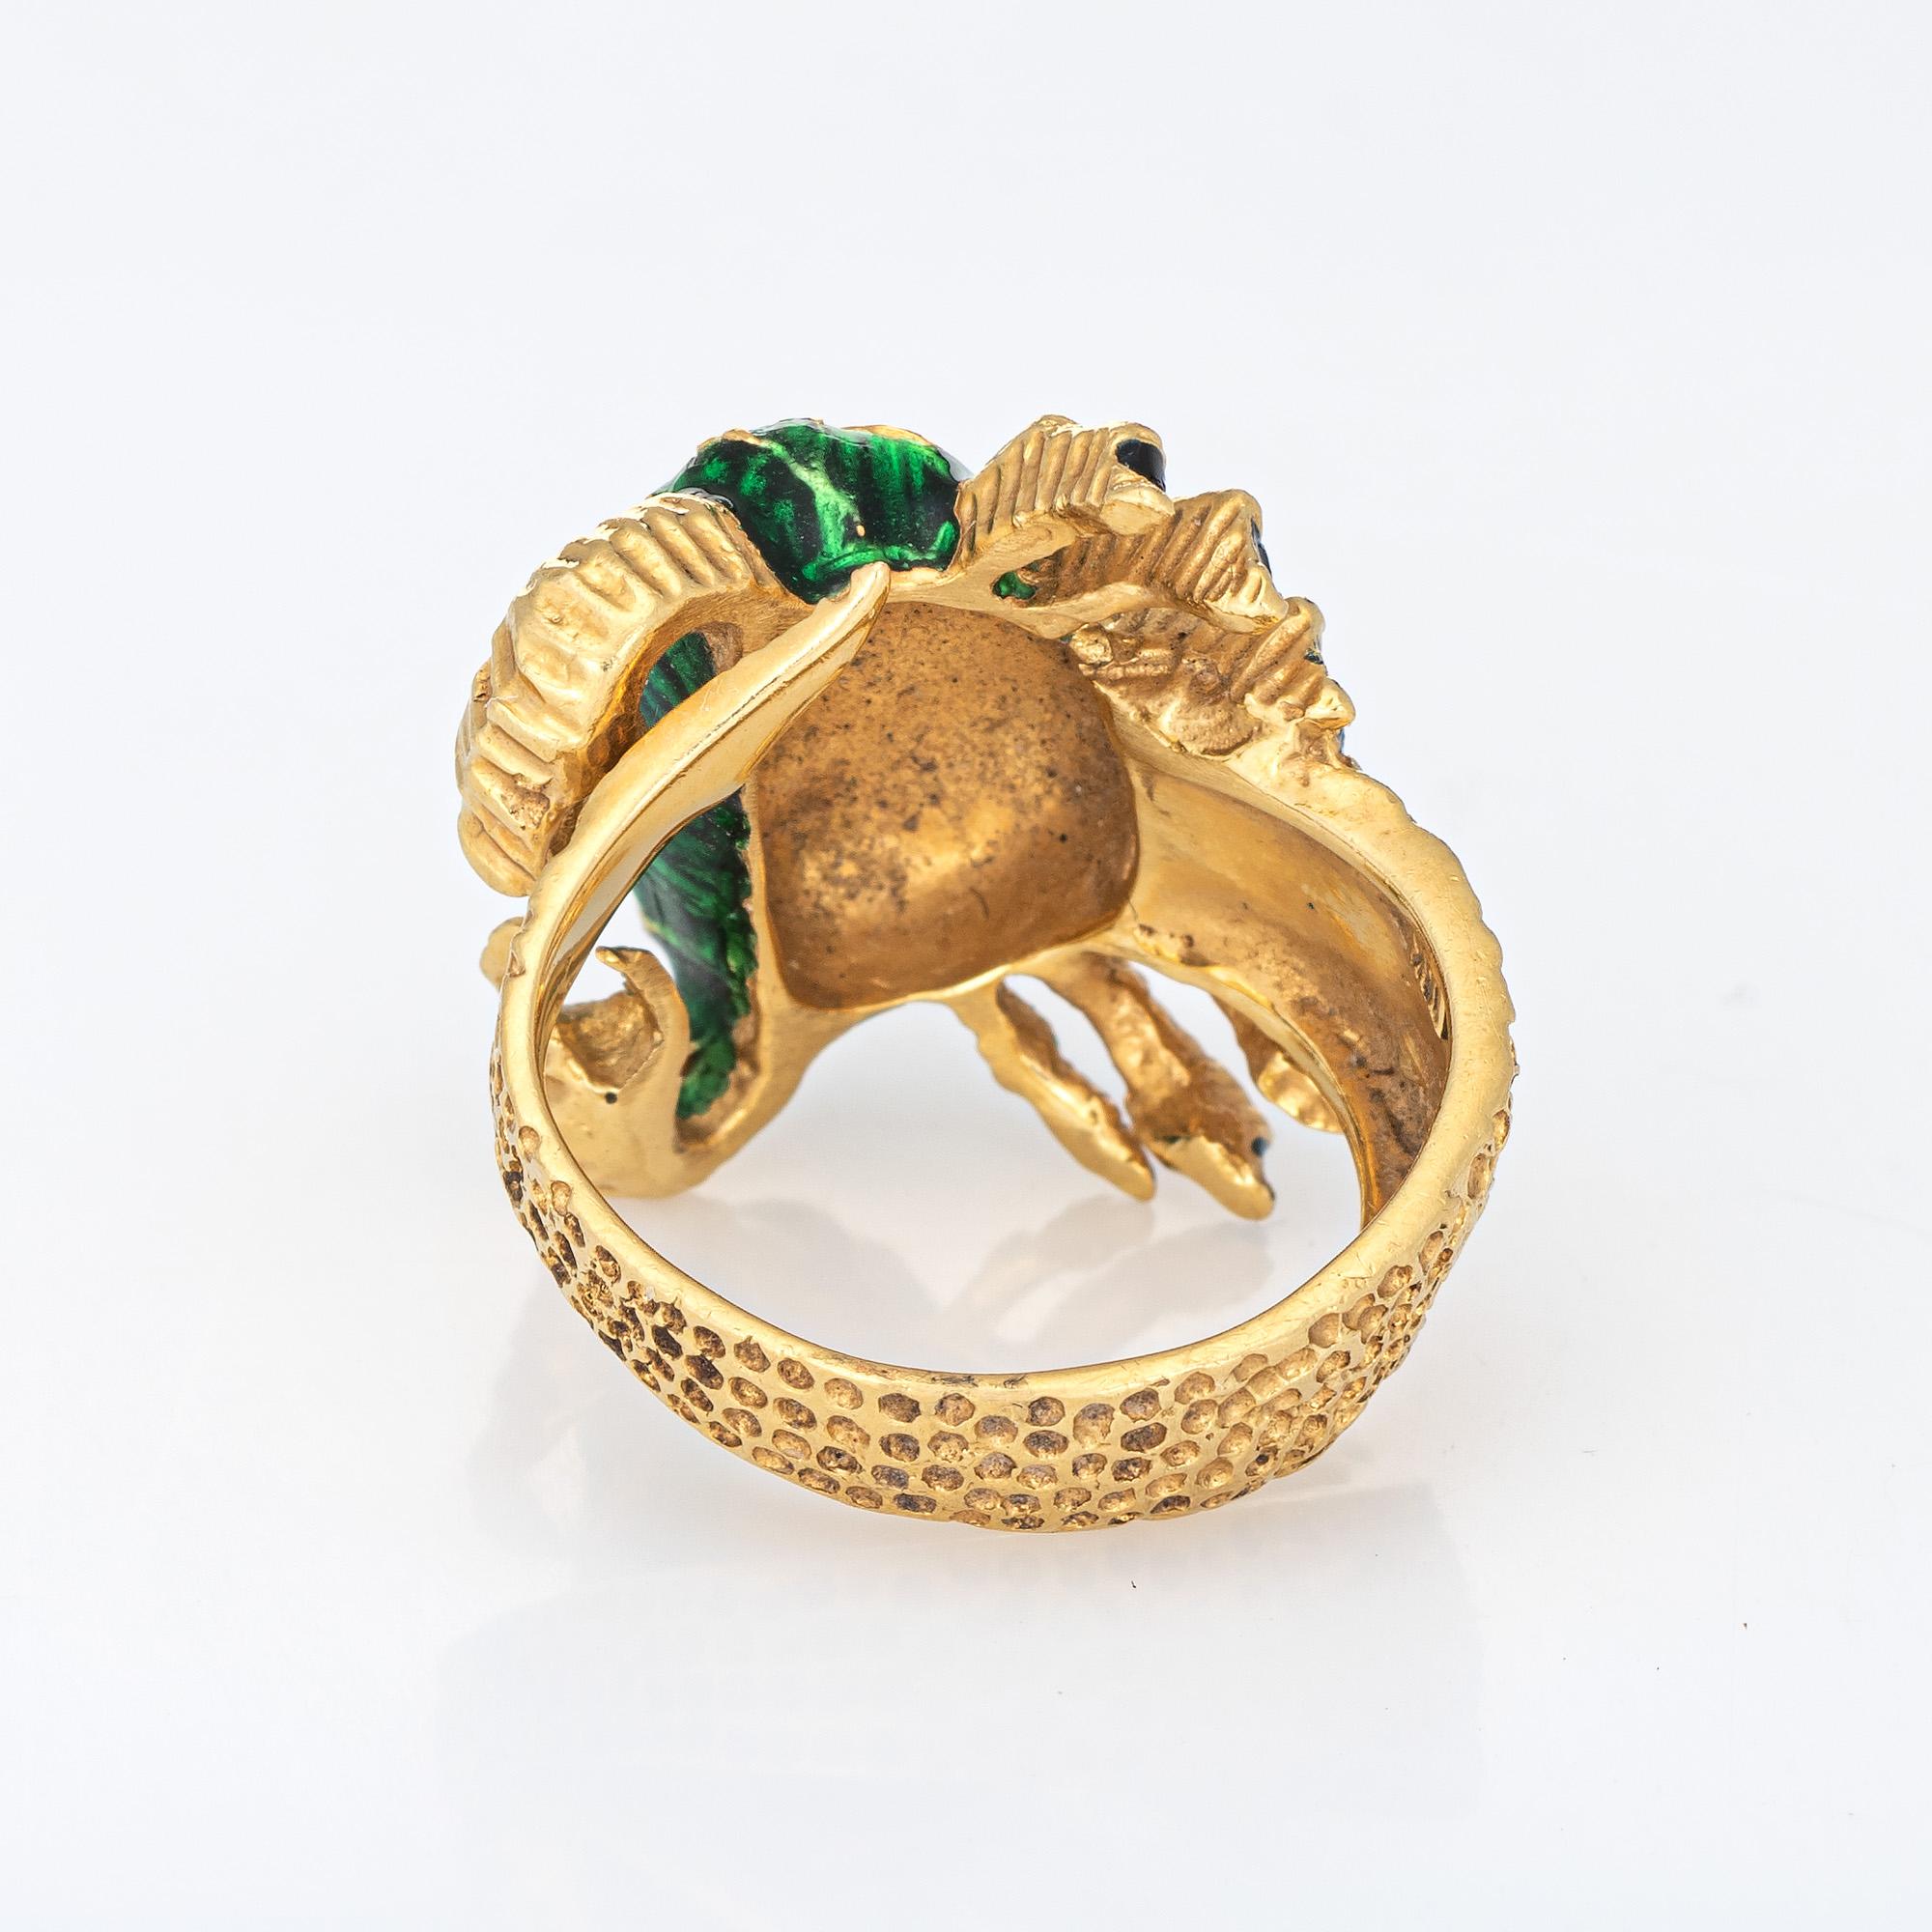 Enamel Crab Ring Vintage 18k Yellow Gold Cancer Zodiac Sign Jewellery 1